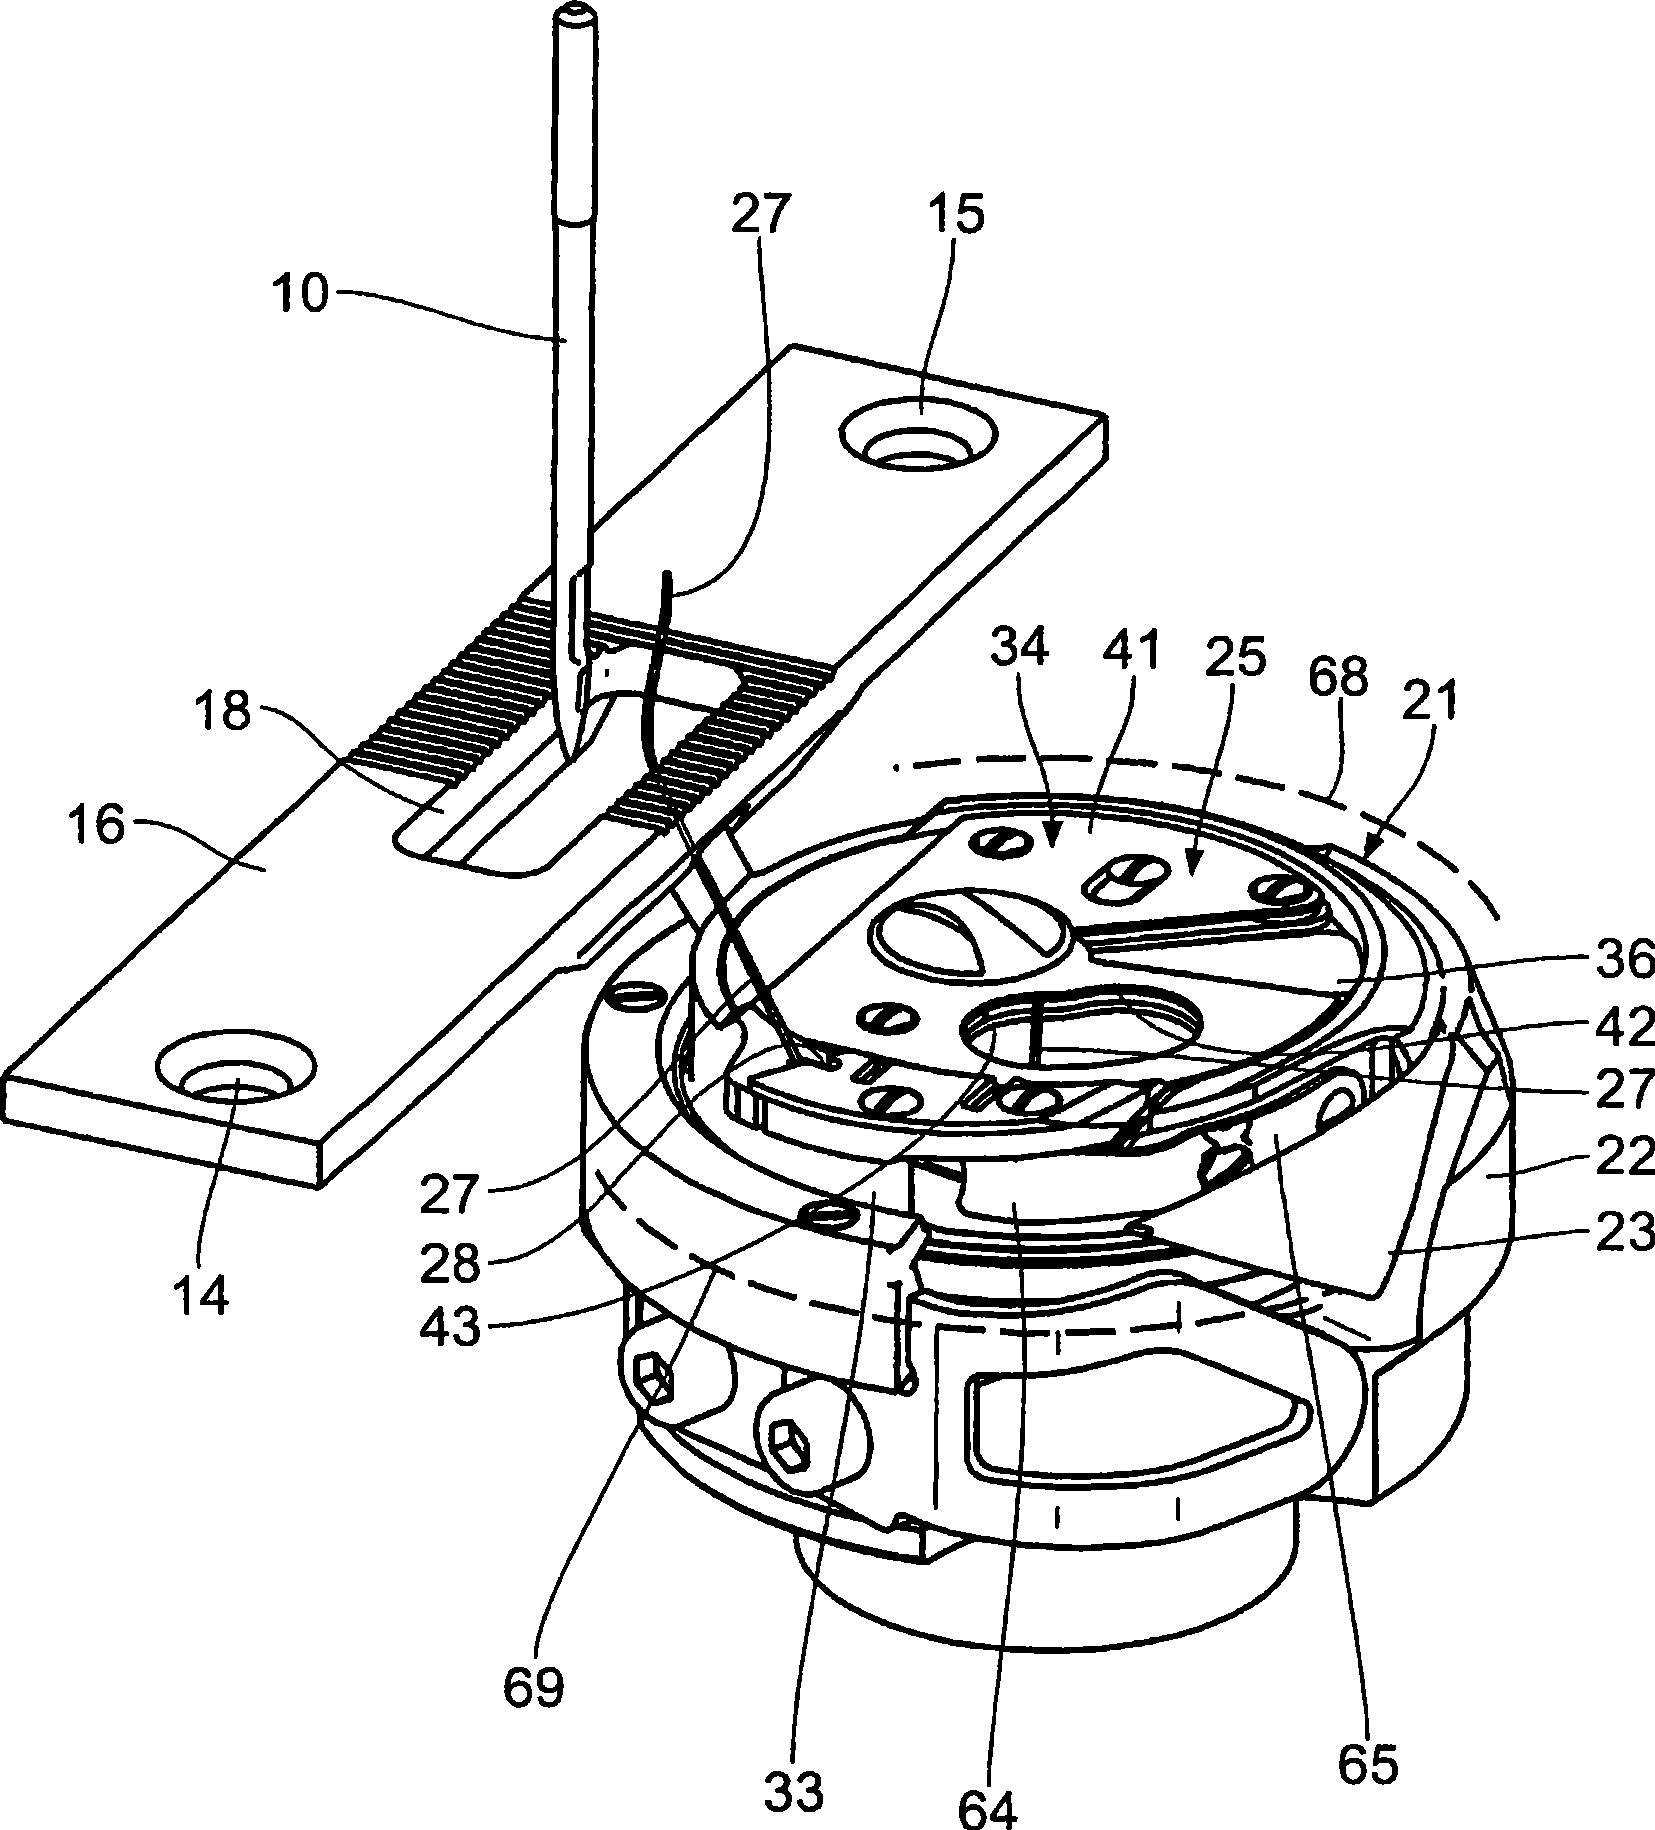 Thread winding housing for inserting into a housing receptacle of a gripper body, rotatable about a vertical axis, of a sewing machine